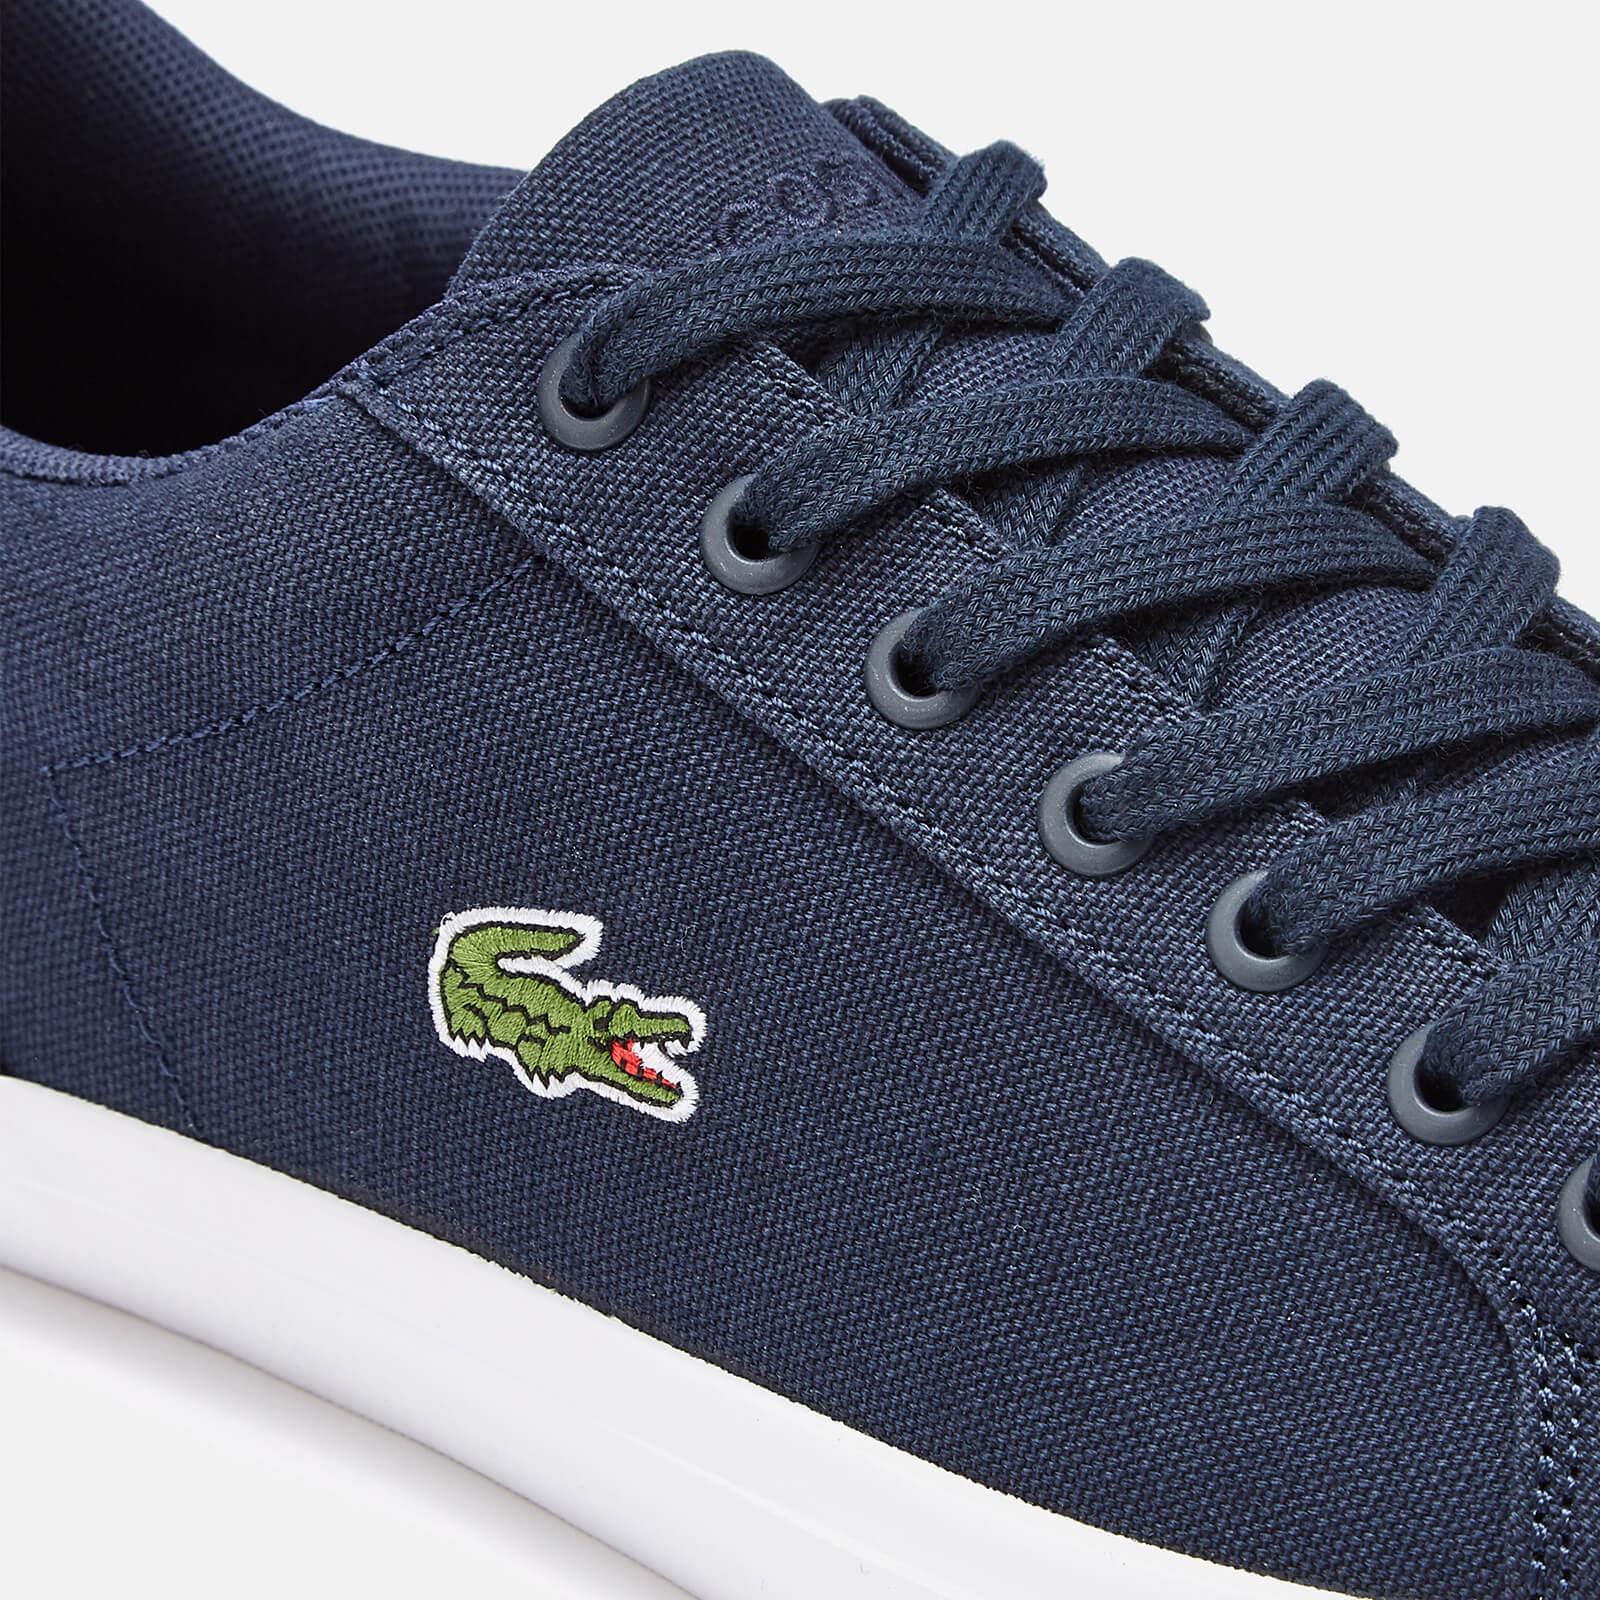 Lacoste Lerond Bl 2 Canvas Trainers in Navy (Blue) Men - Lyst